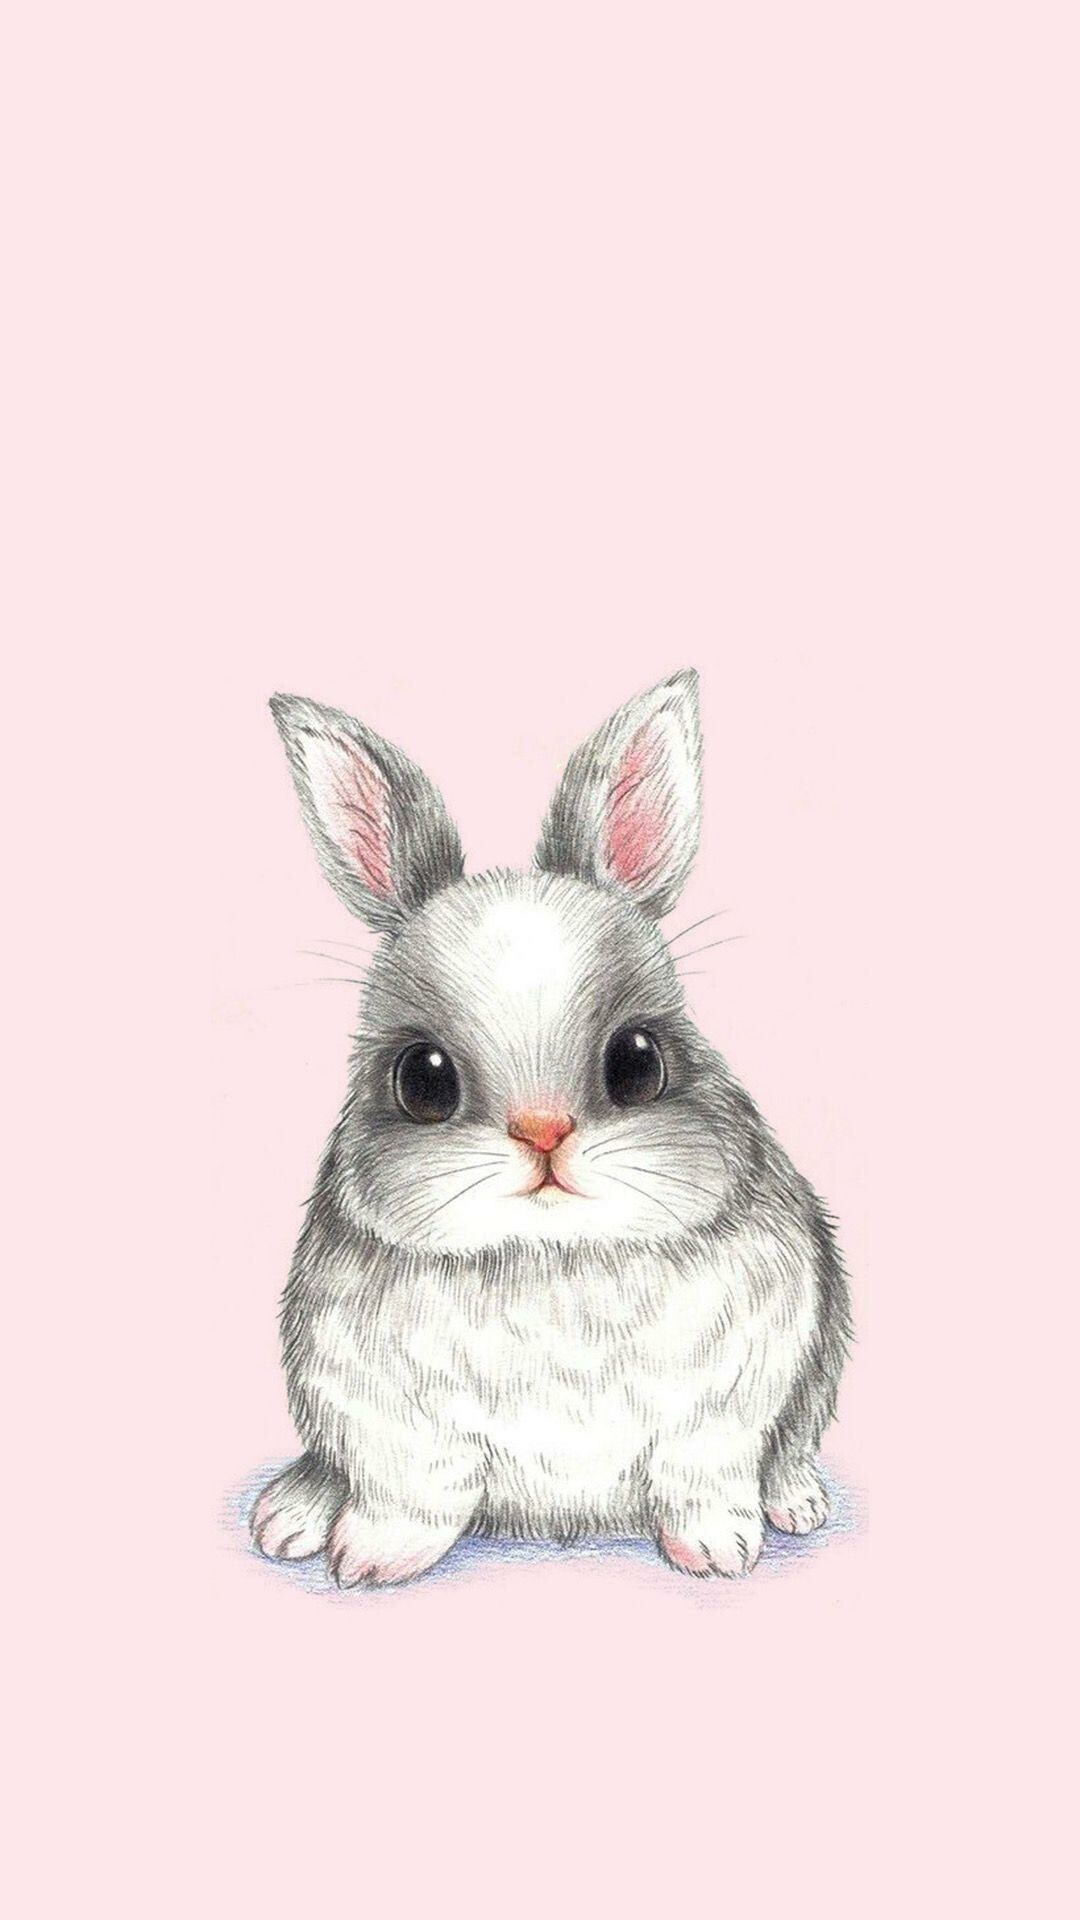 Rabbit: Small, furry mammals usually known for their ears and reproductive capability. 1080x1920 Full HD Wallpaper.